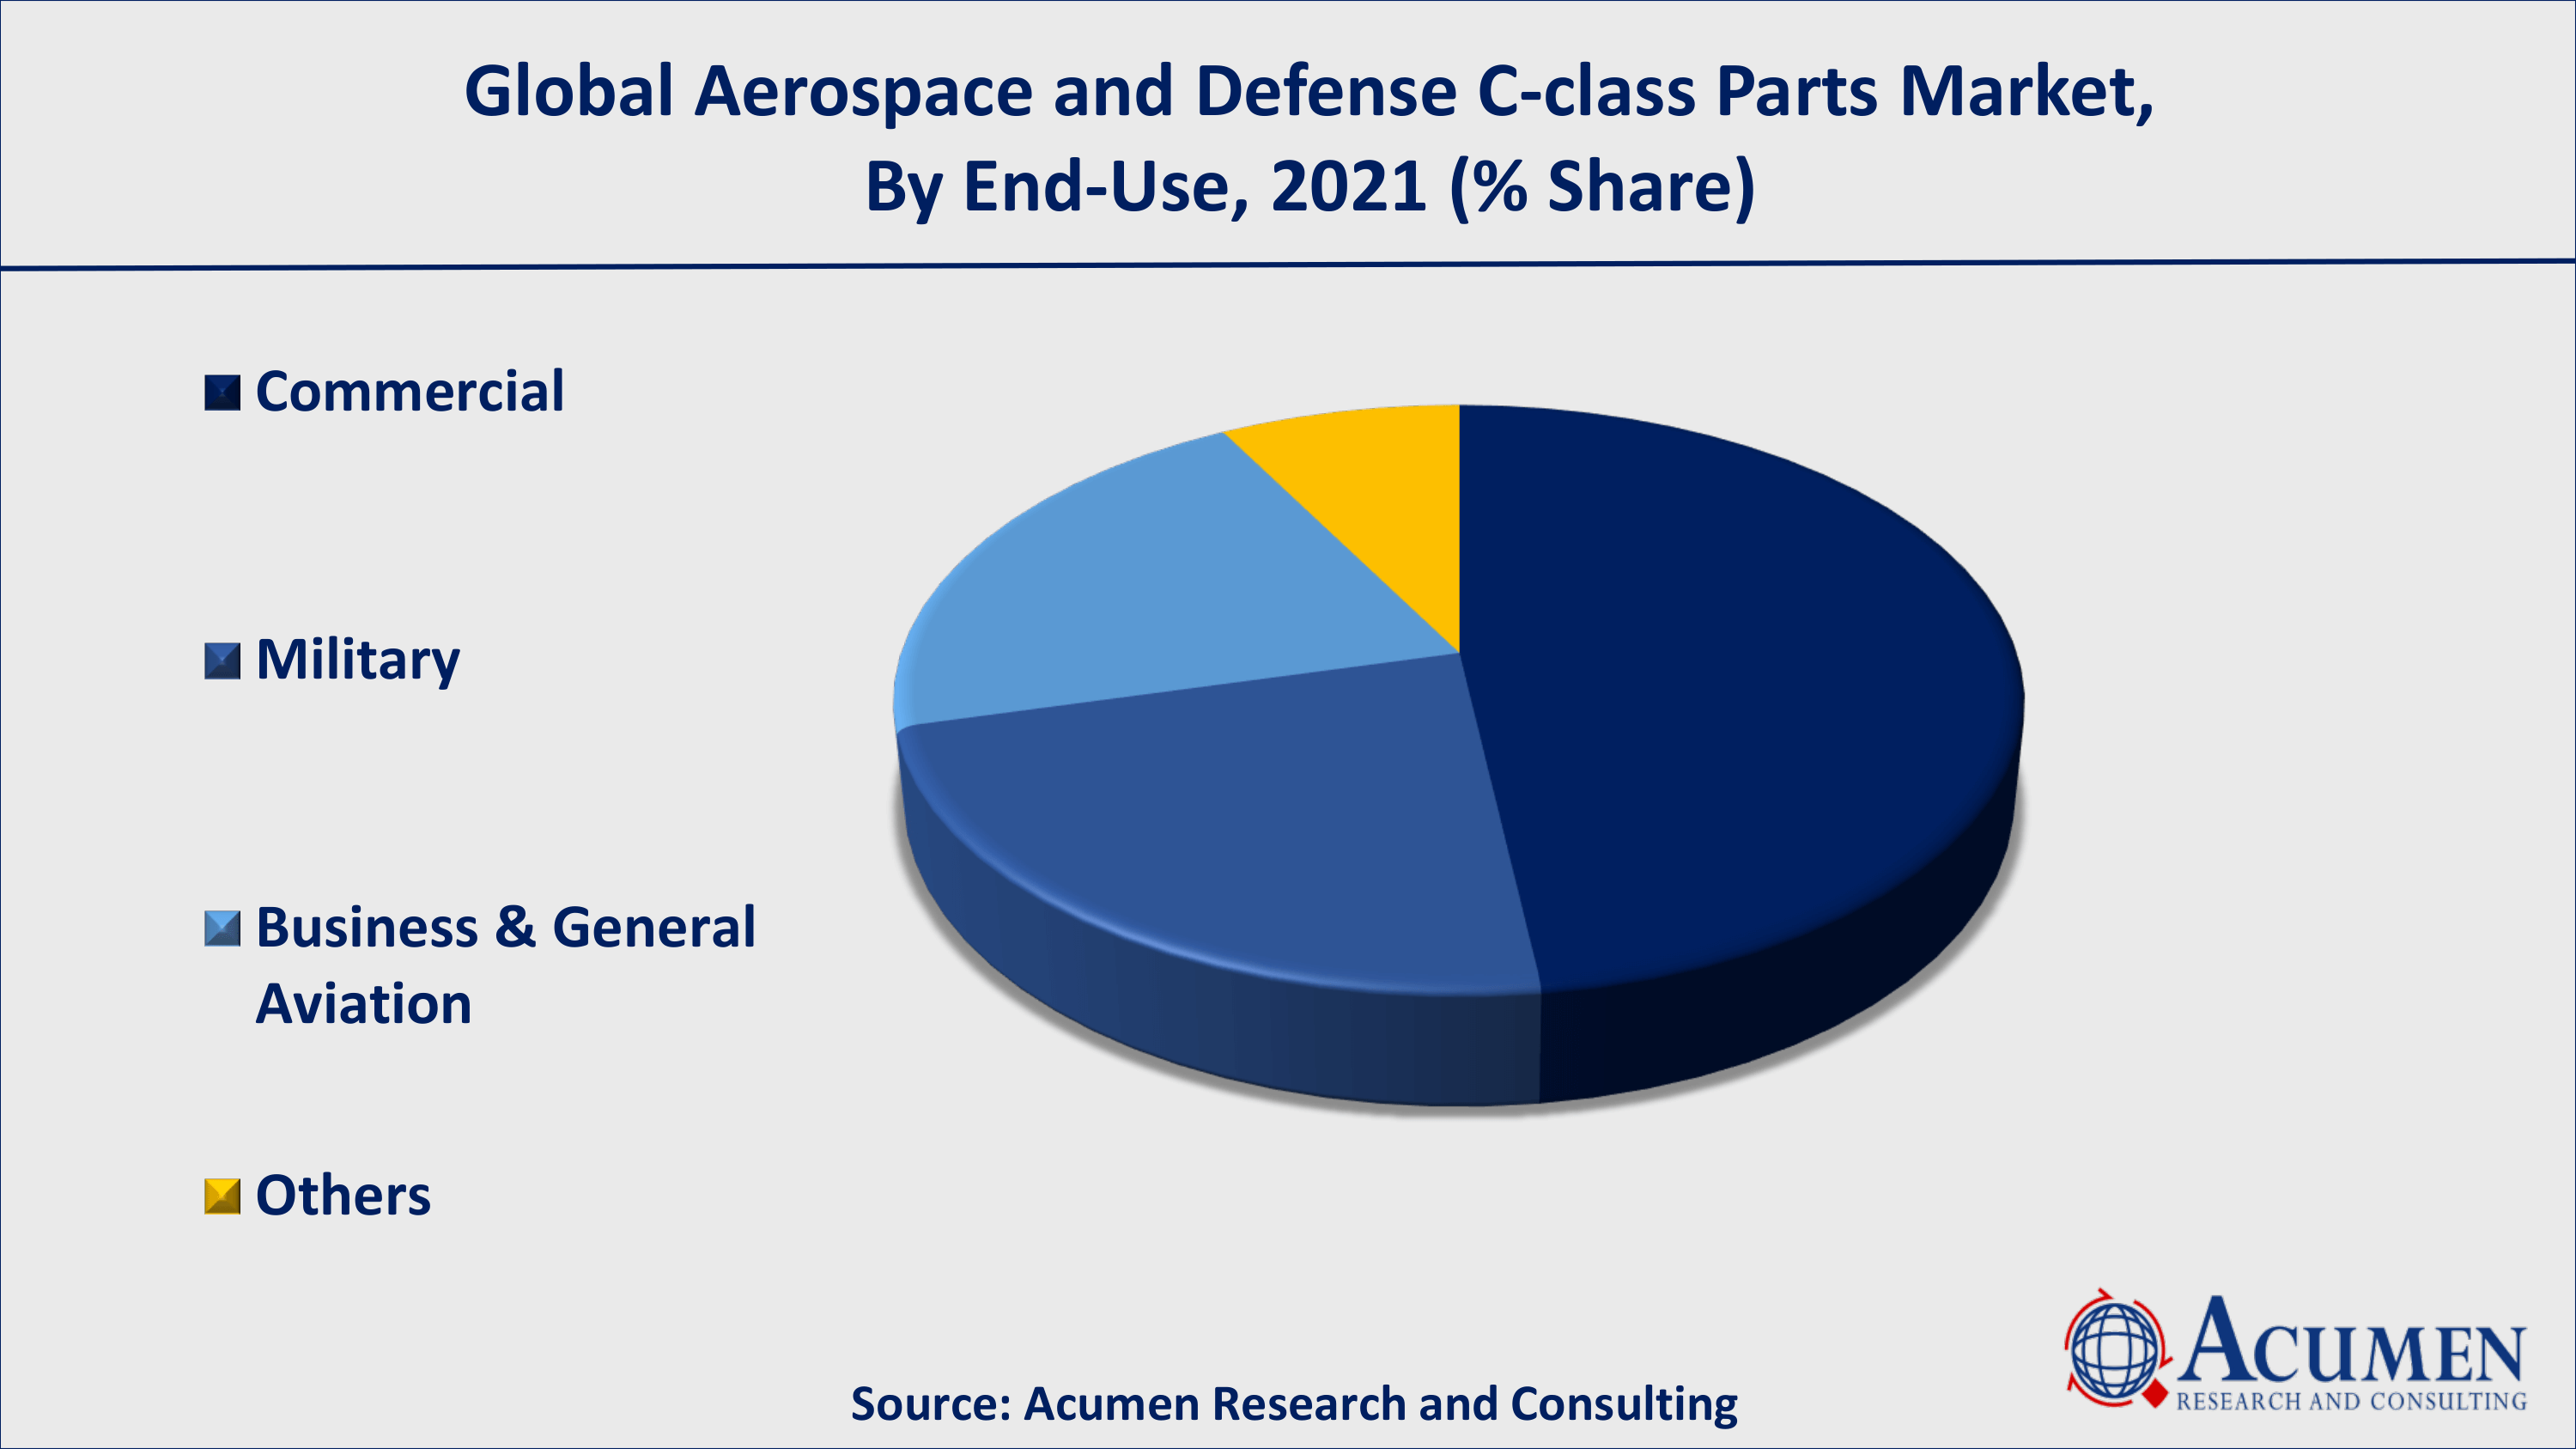 Asia-Pacific aerospace and defense c-class parts market growth will register quick CAGR from 2022 to 2030